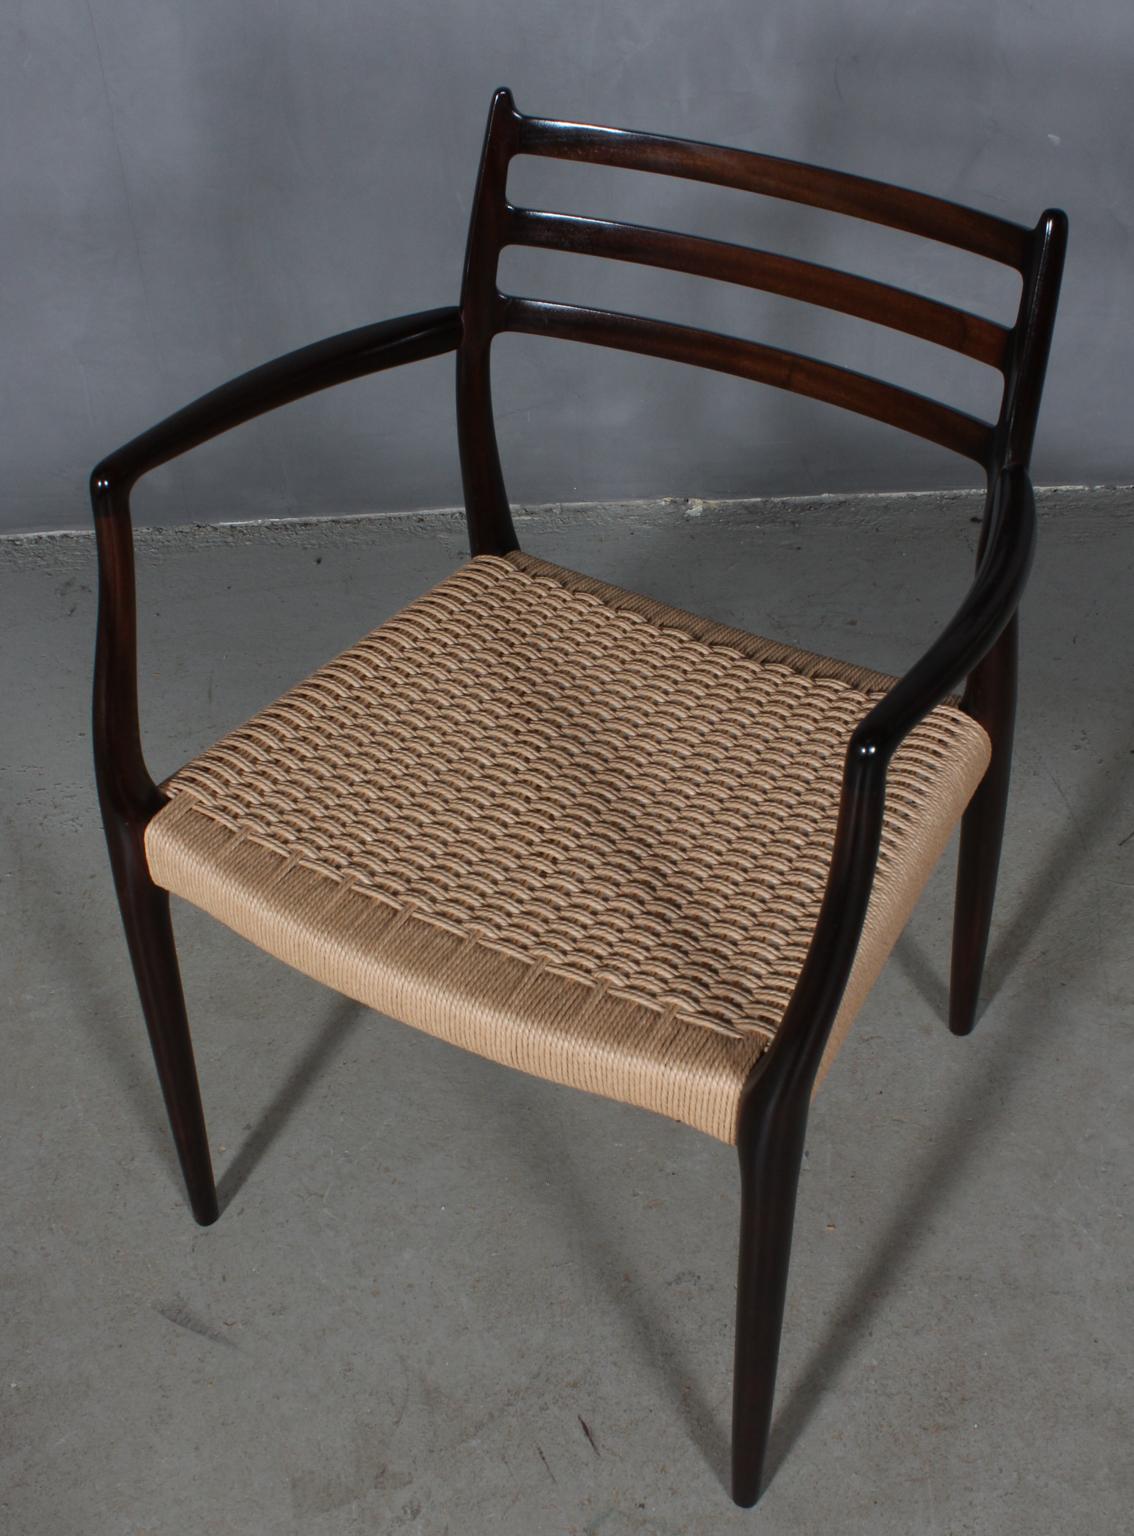 N. O. Møller armchair with frame of solid lacquered mahogany.

Seat weaved with Danish paper cord.

Model 62, made by J. L. Møller, Denmark, 1960s.